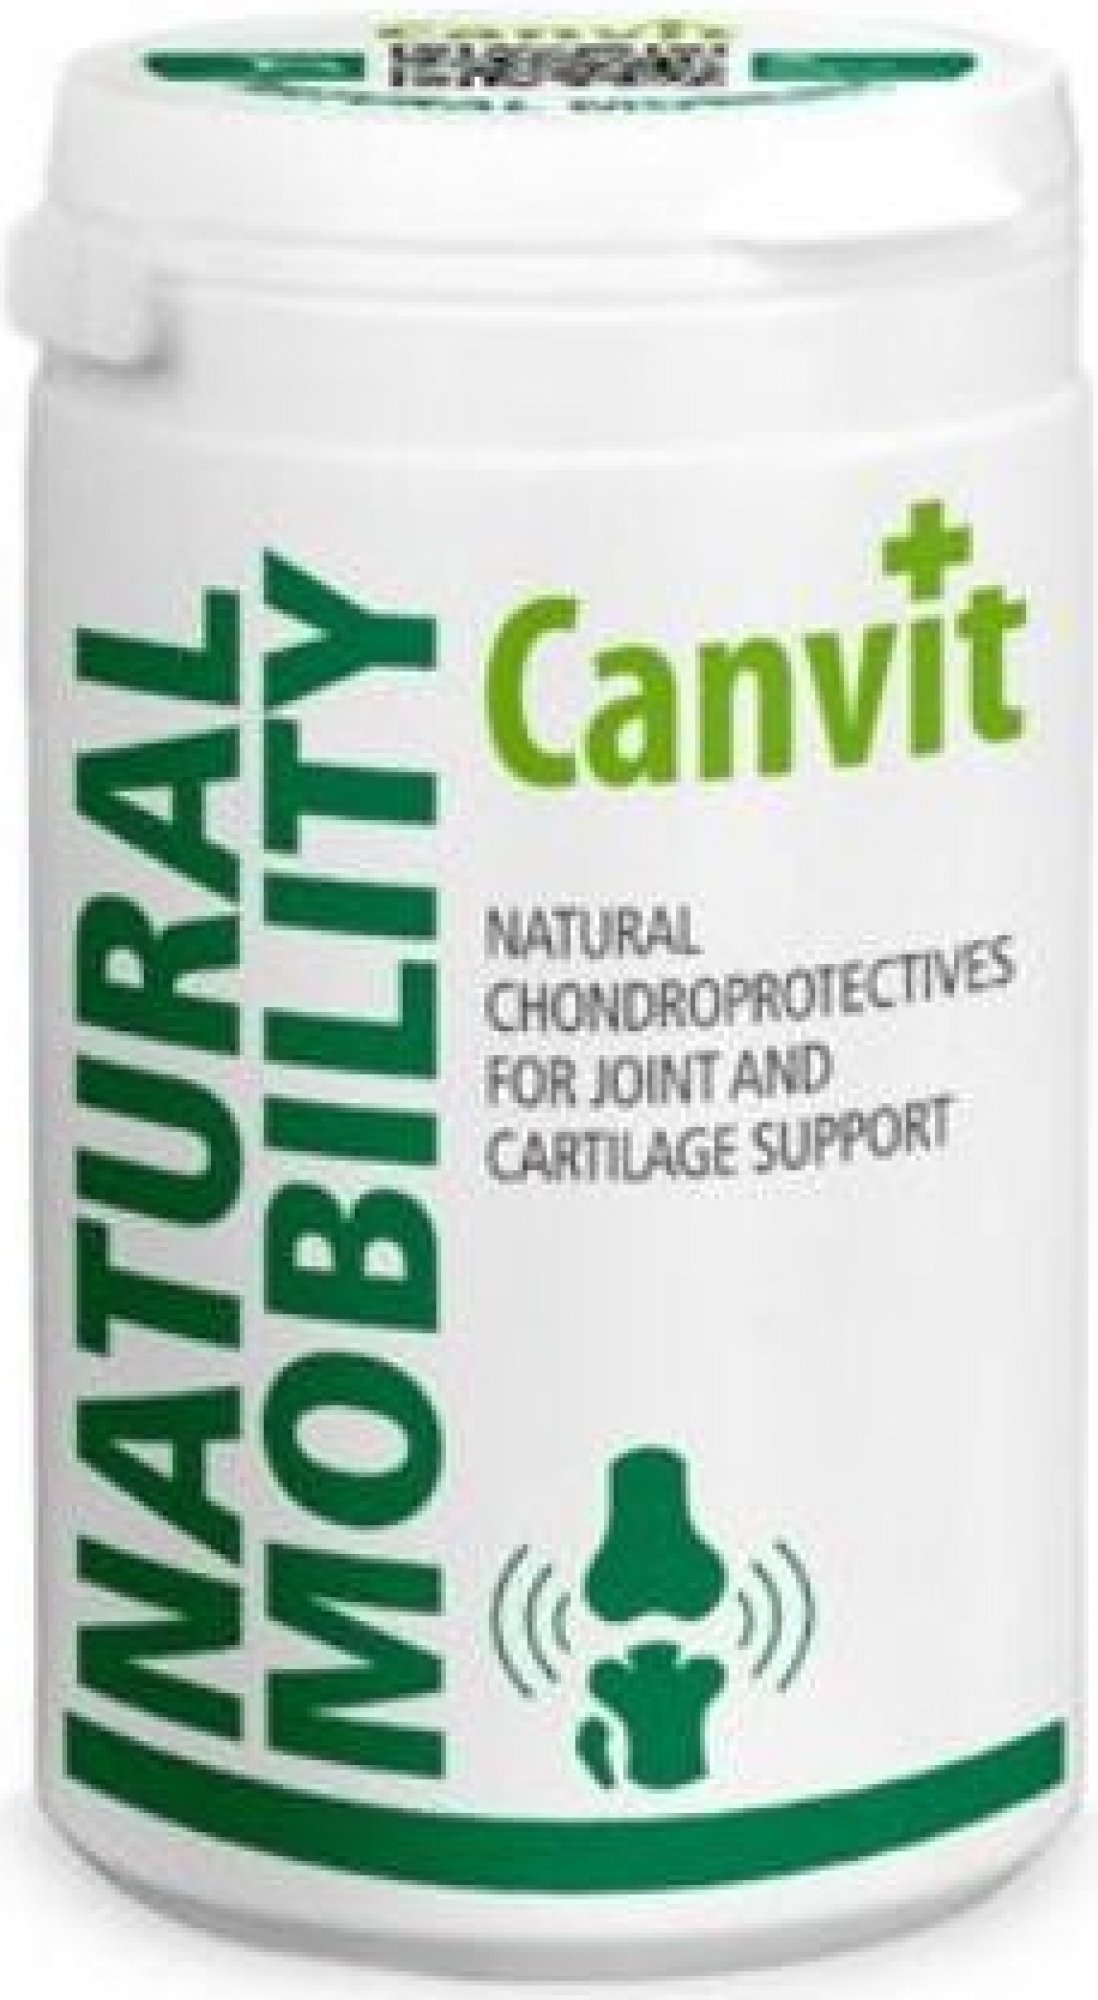 Canvit Natural Mobility pre psy 230 tbl. 230 g